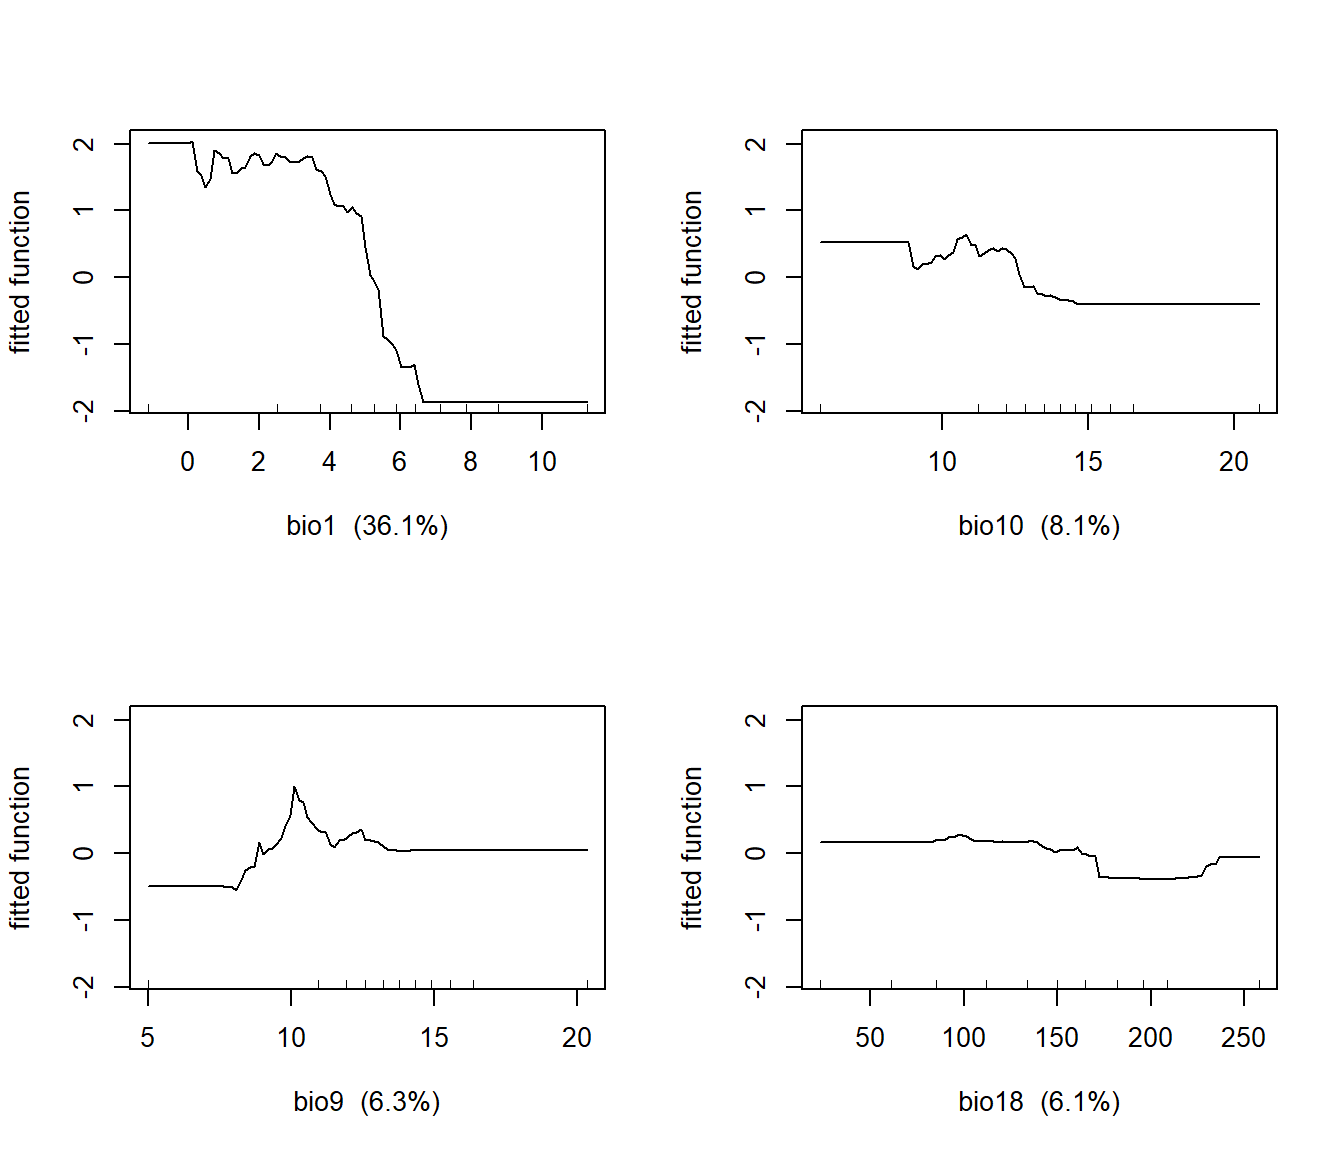 Partial regression plots showing the response of subalpine fir to WorldClim bioclimatic indices in a boosted regression tree model.